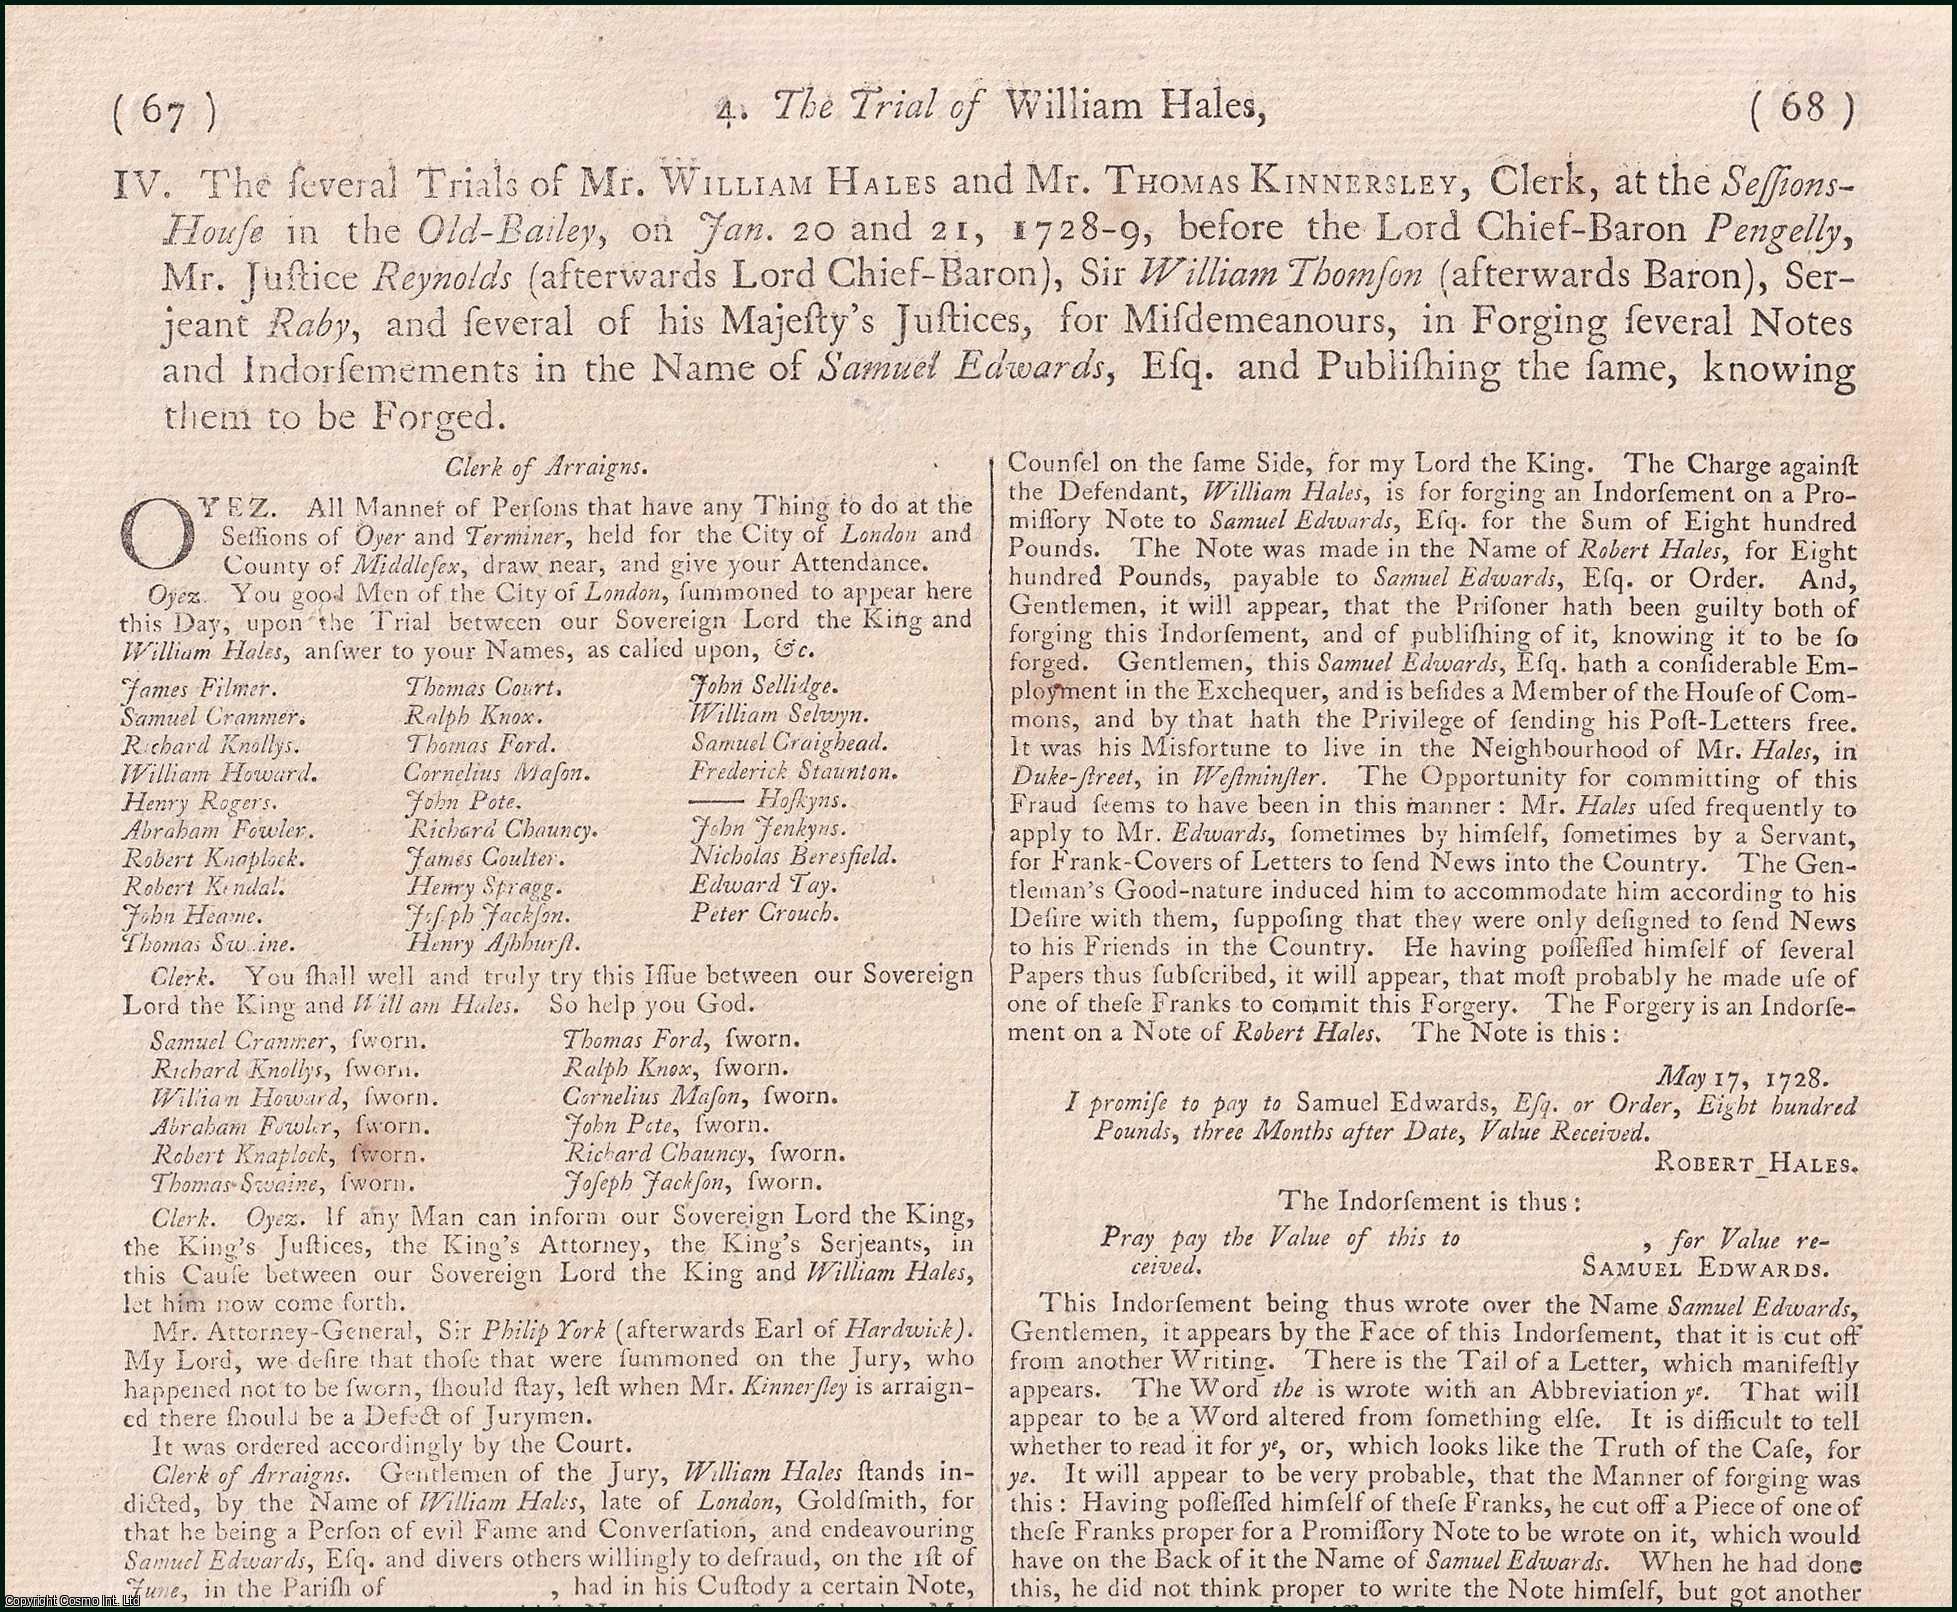 [Trial]. - The several Trials of Mr. William Hales and Mr. Thomas Kinnersley, Clerk, at the Sessions-House in the Old-Bailey, on Jan. 20 and 21, 1728-9, before the Lord Chief-Baron Pengelly, Mr. Justice Reynolds (afterwards Lord Chief-Baron), Sir William Thomson (afterwards Baron), Serjeant Raby, and several of his Majesty's Justices, for Misdemeanours, in Forging several Notes and Indorsemements in the Name of Samuel Edwards, Esq. and Publishing the same, knowing them to be Forged, 1728. An original report from the Collected State Trials.